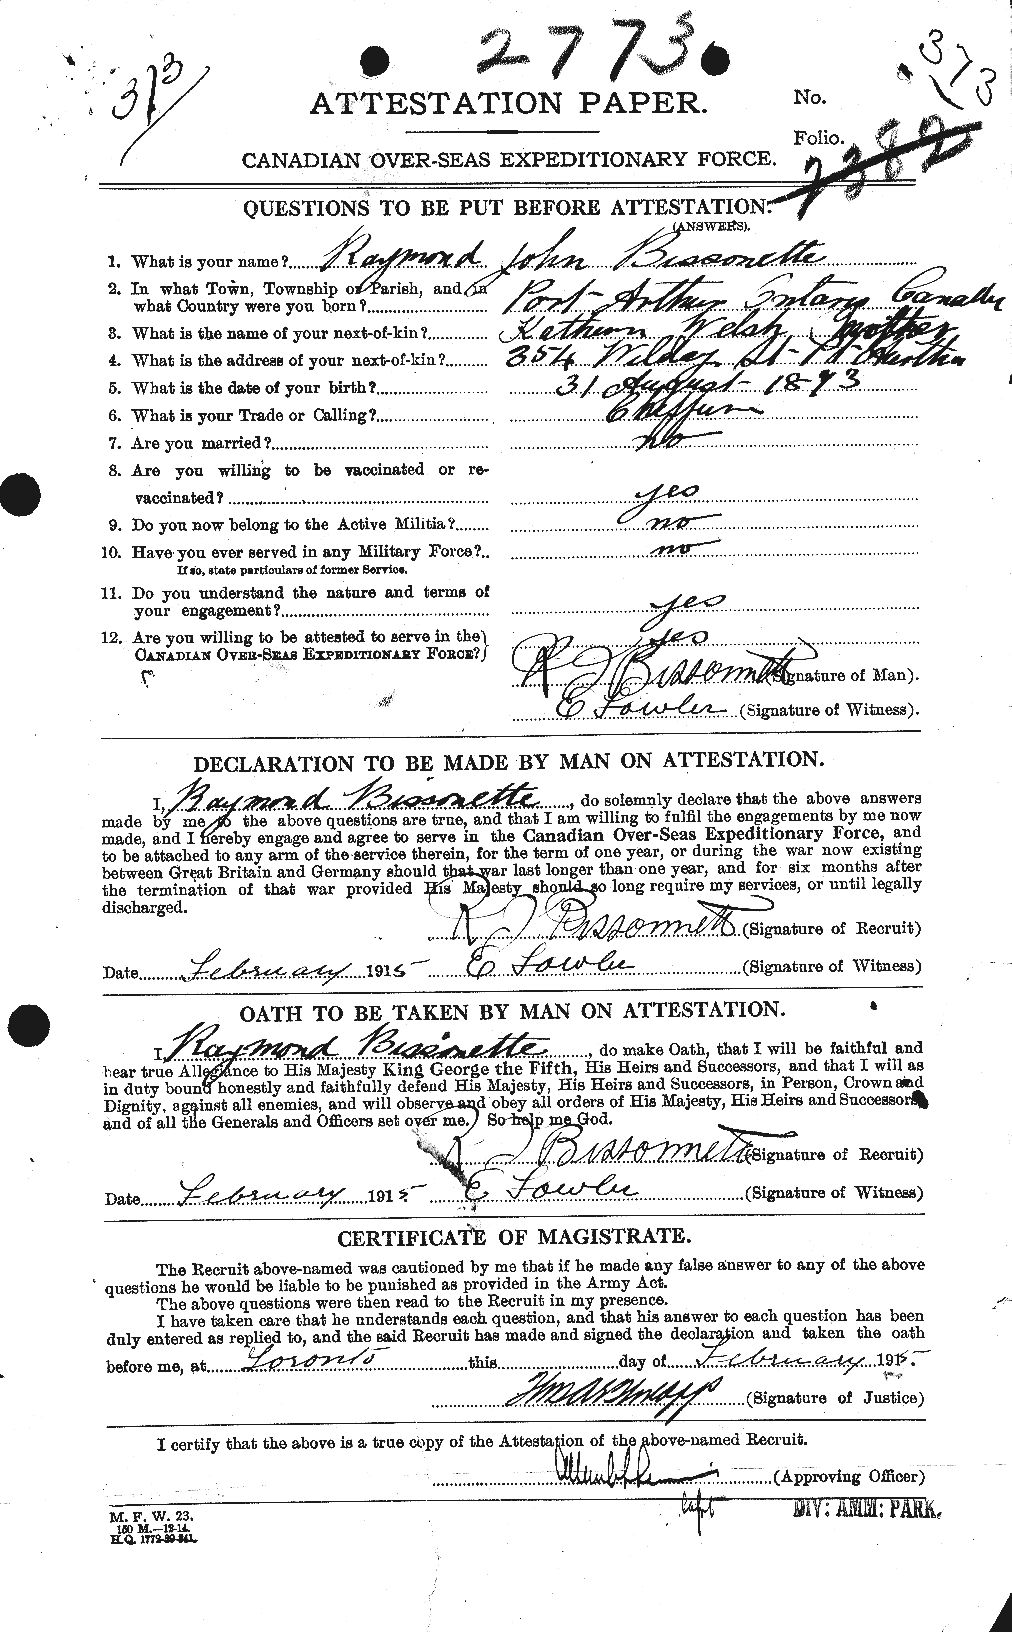 Personnel Records of the First World War - CEF 246231a